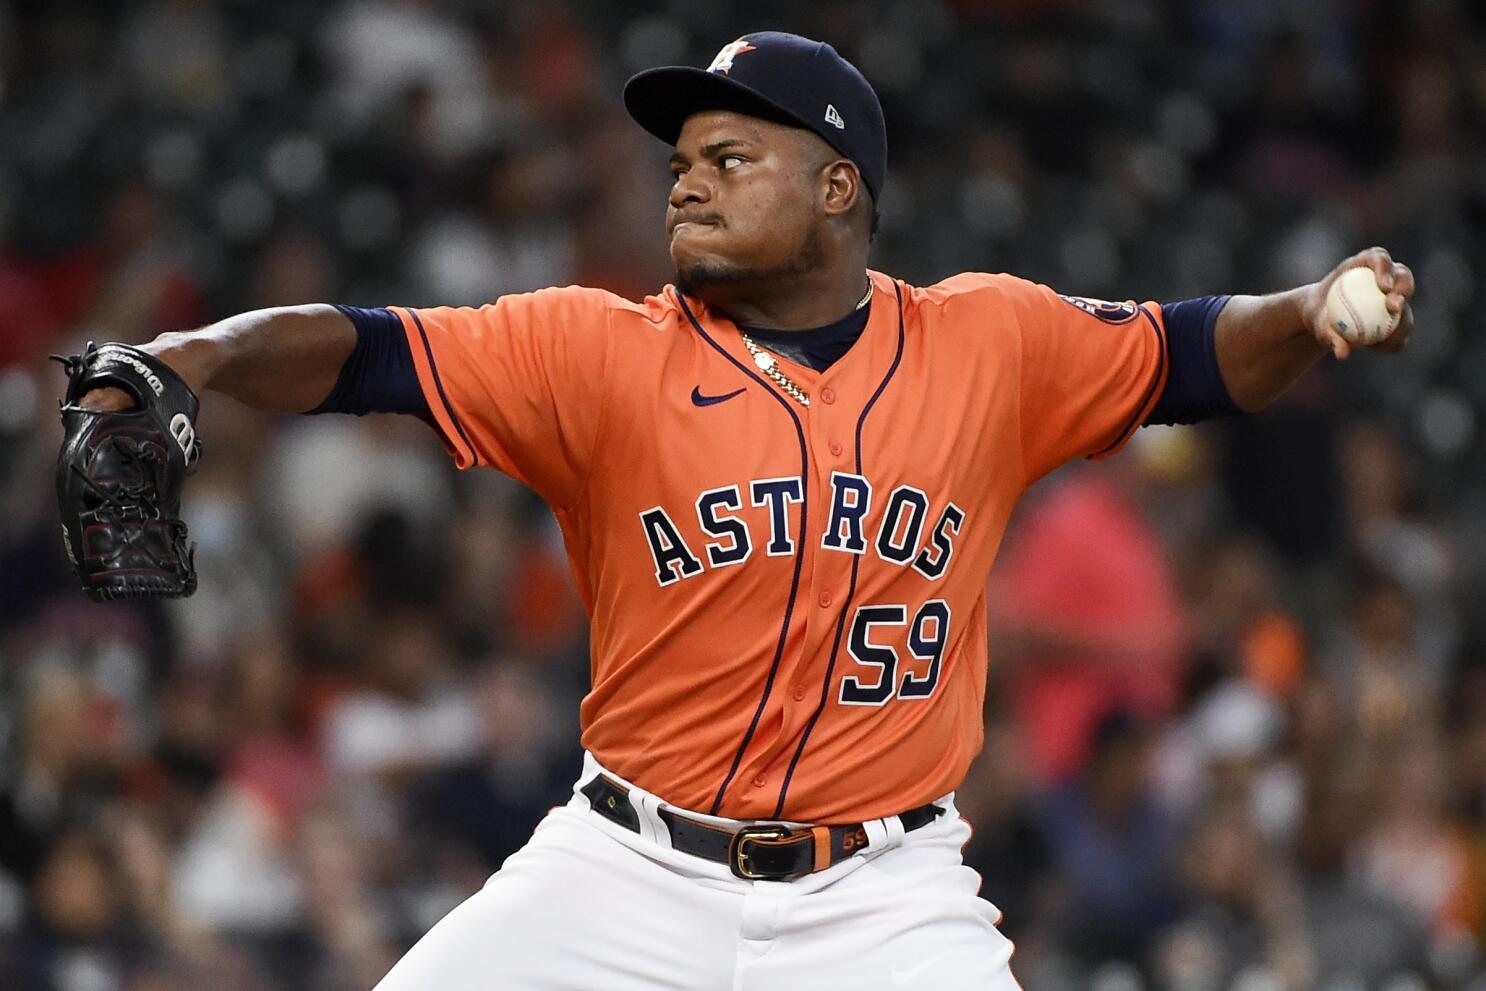 Astros lefty Valdez scratched from start with cut on finger